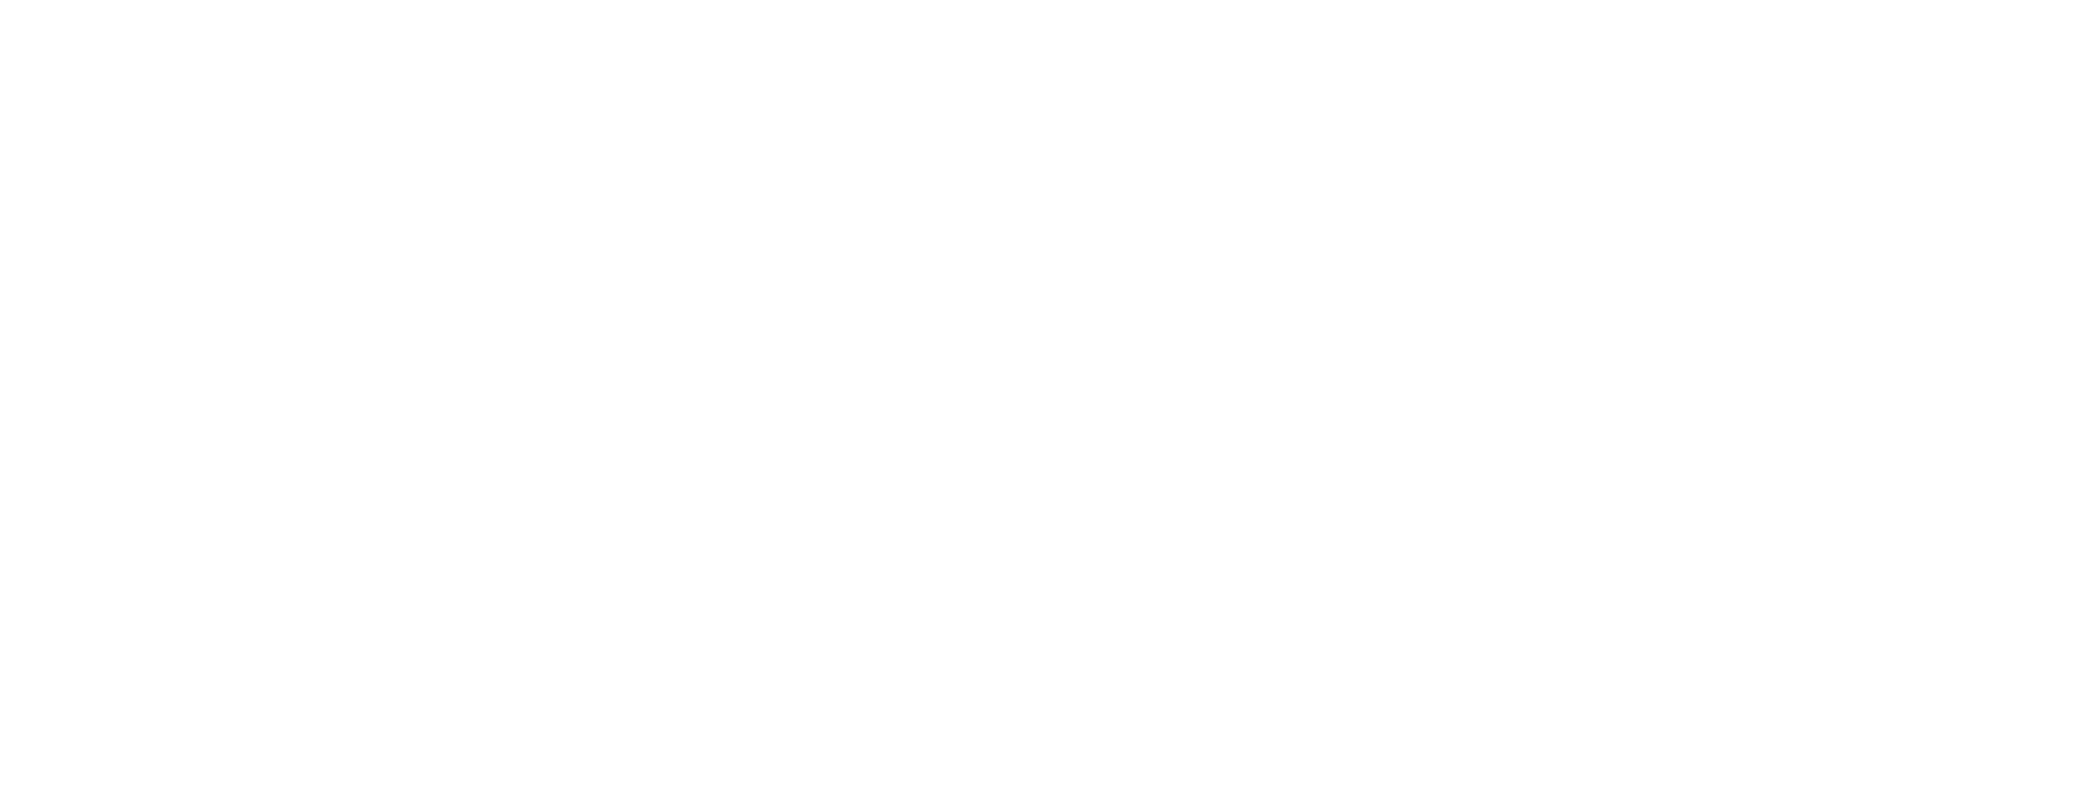 AAA-Paving-Since-1964.png